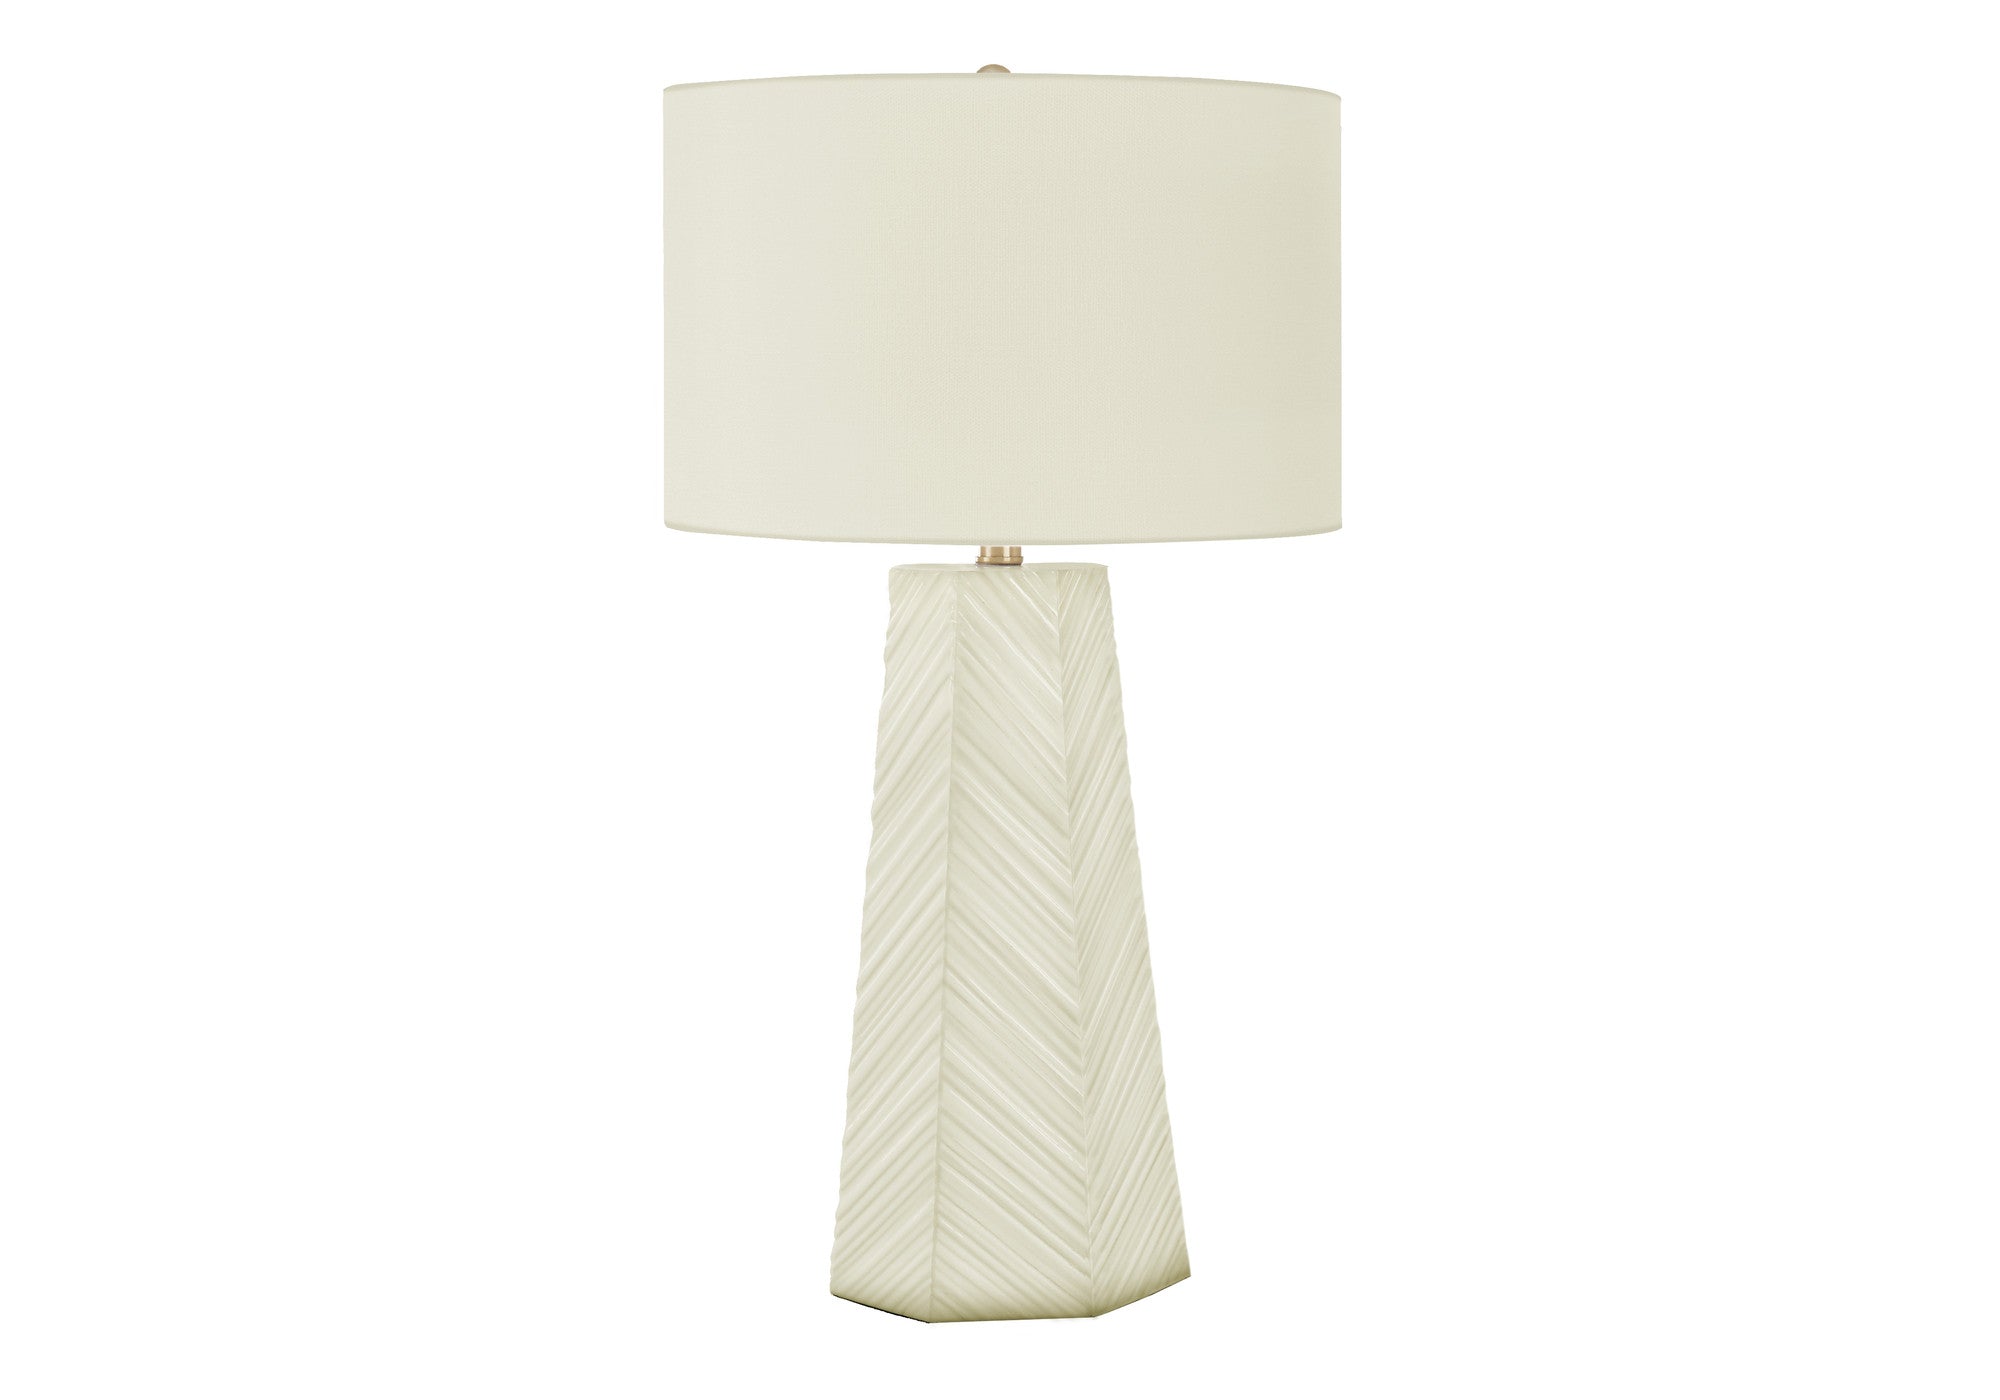 29" White Ceramic Geometric Table Lamp With Ivory Drum Shade